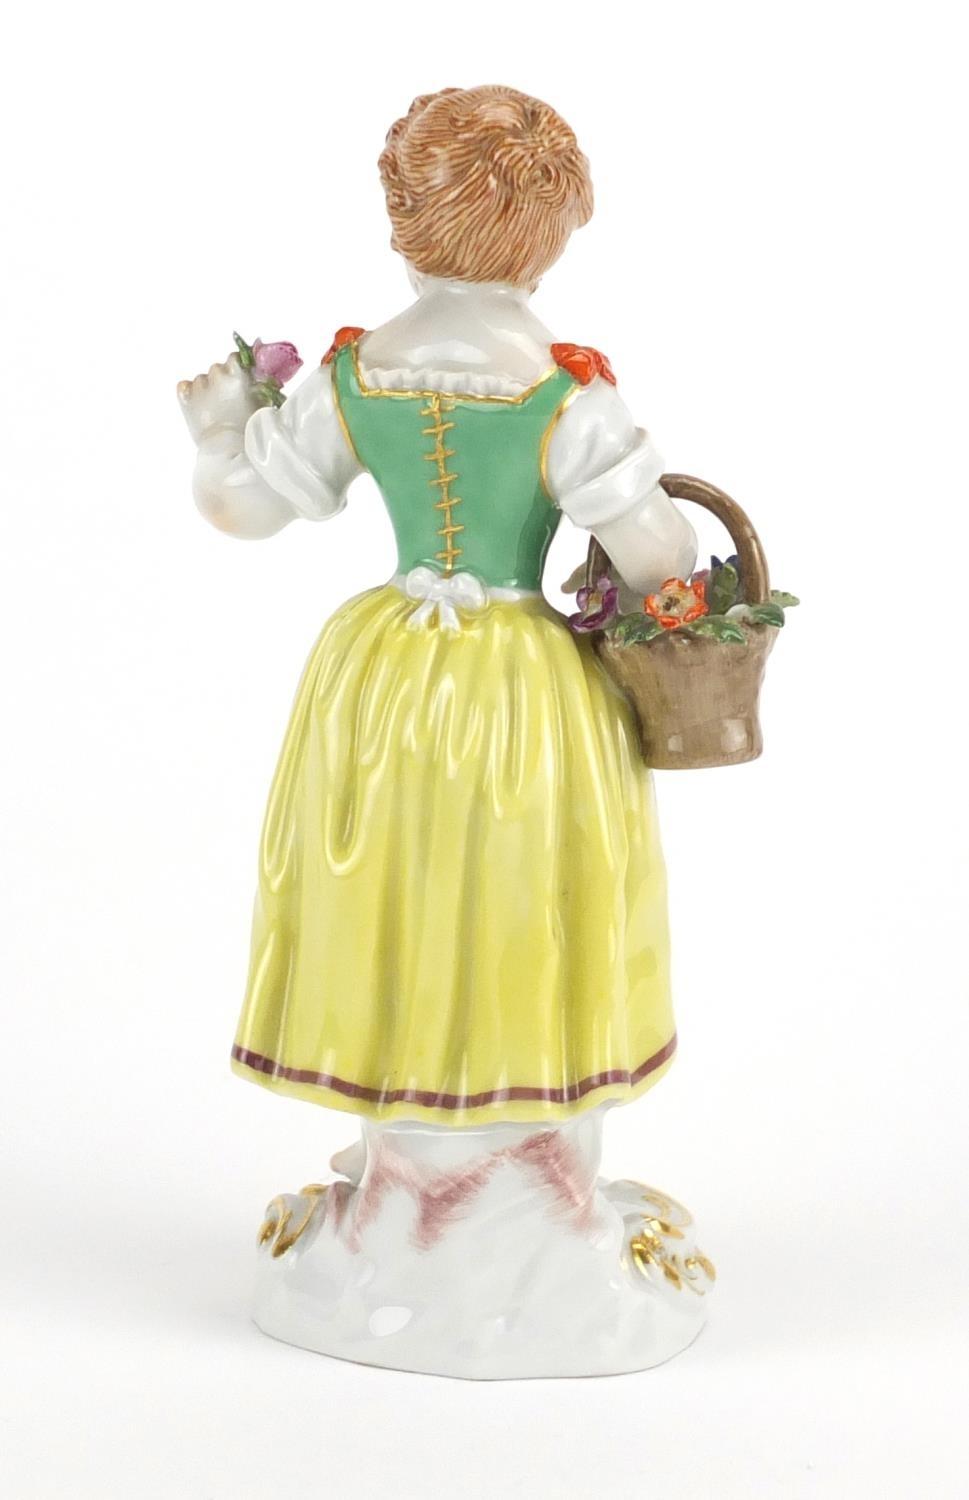 19th century Meissen porcelain figurine of a girl holding a basket of flowers, blue cross sword - Image 3 of 5